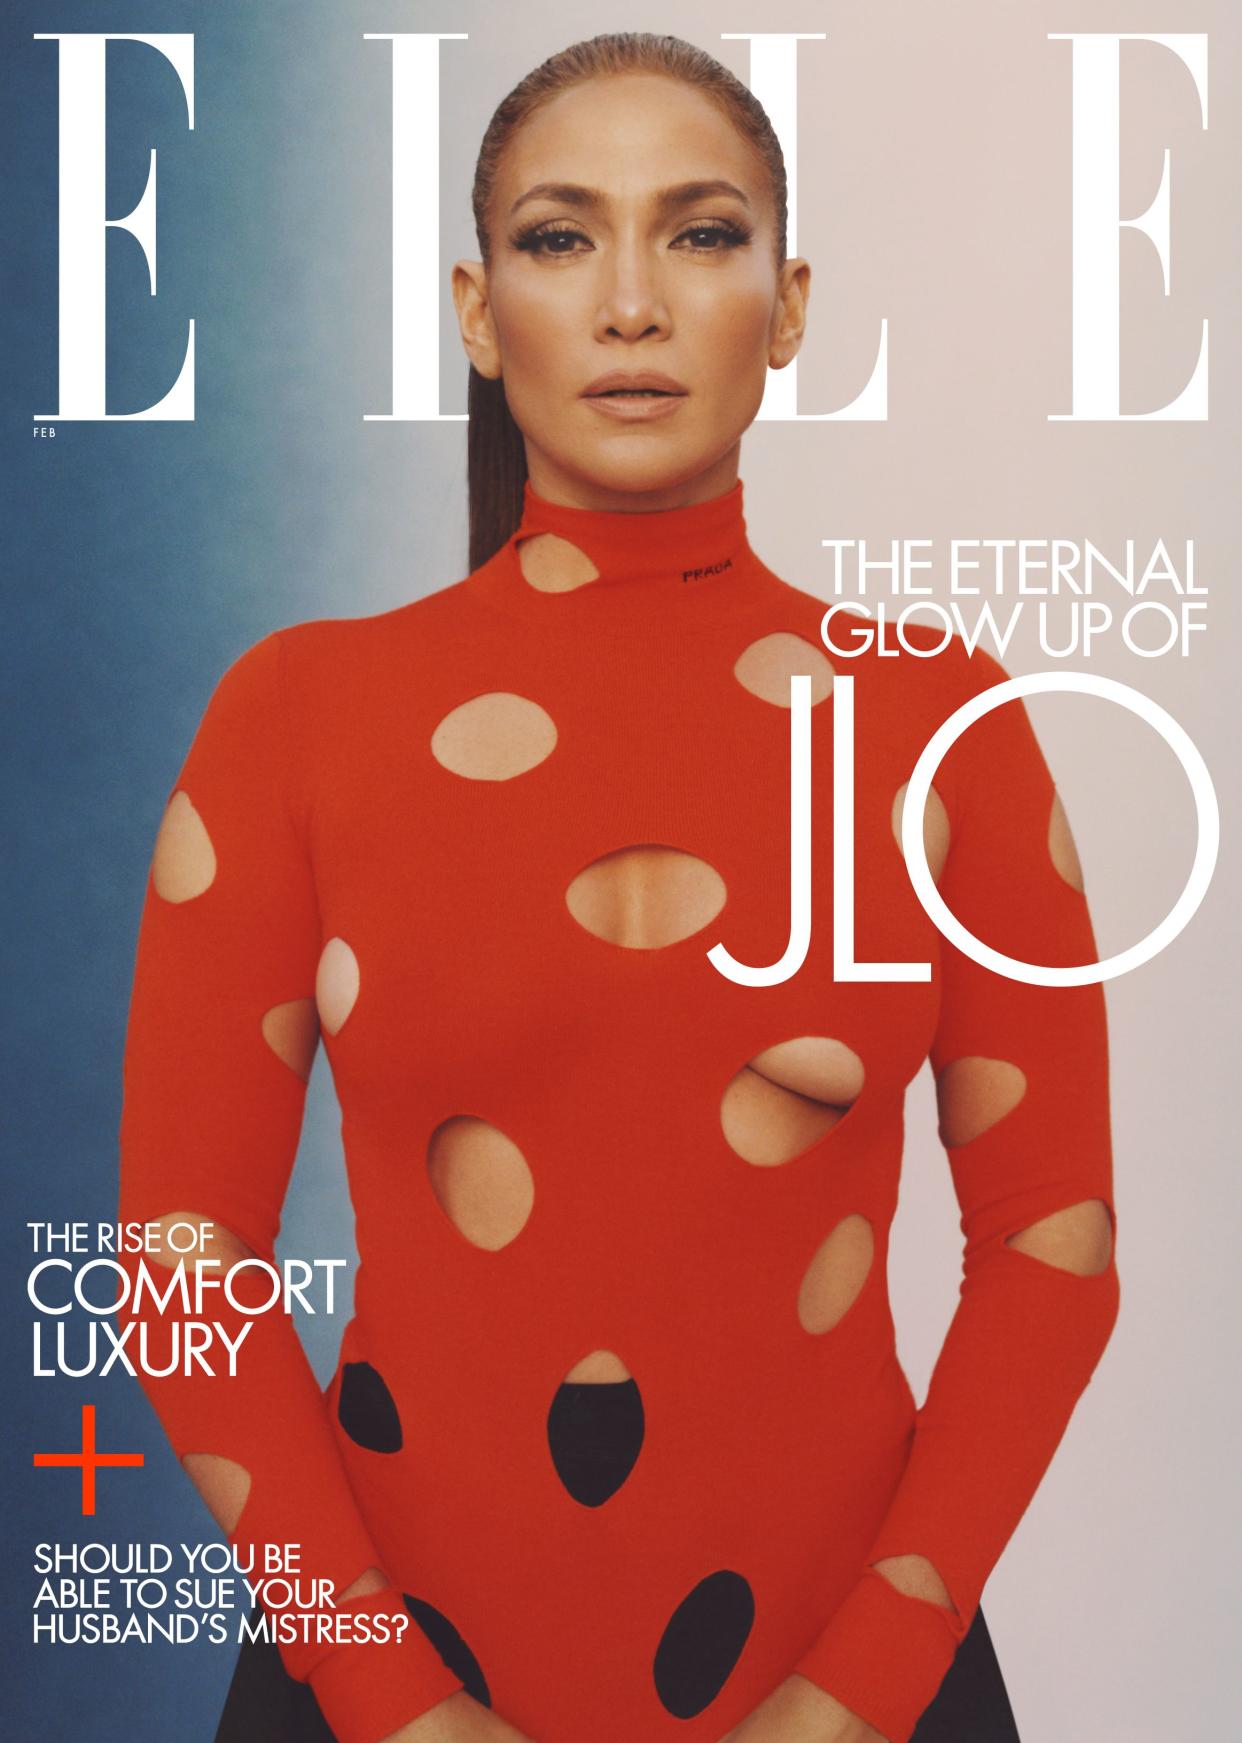 Jennifer Lopez stuns on the Feb. 2021 issue of Elle, talking about her first-ever beauty line, JLo Beauty, wedding plans with fiancé Alex Rodriguez and more.